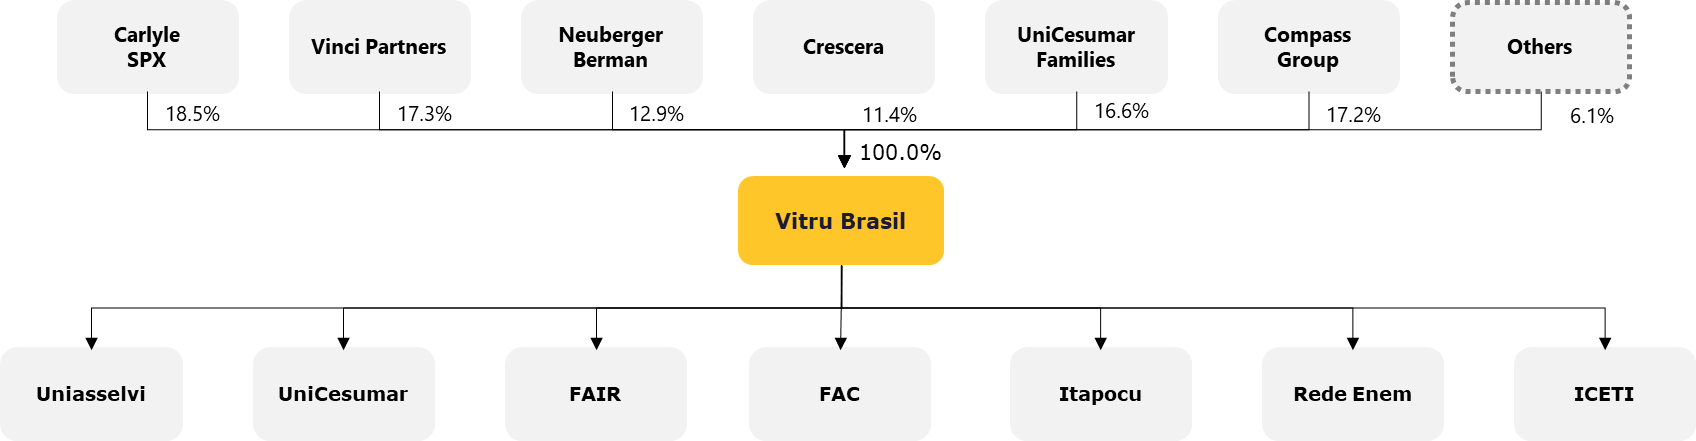 Vitru Group simplified structure after the Proposed Transaction